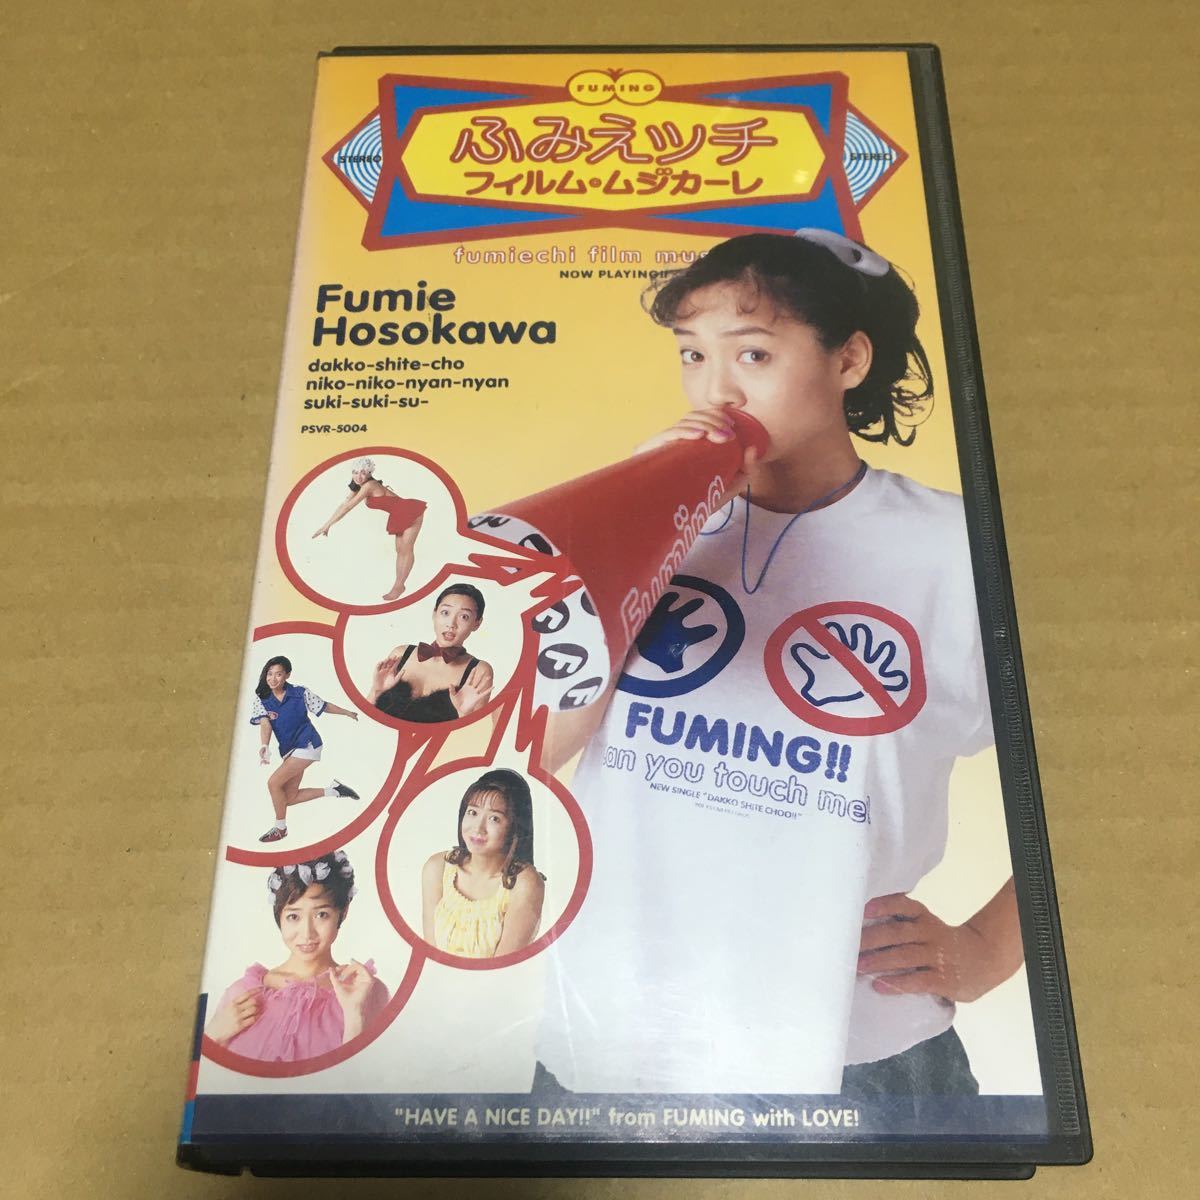 VHS Hosokawa Fumie ...chi film *mji car re* small west .. stone . ping-pong * soft case none if cat pohs shipping possibility.